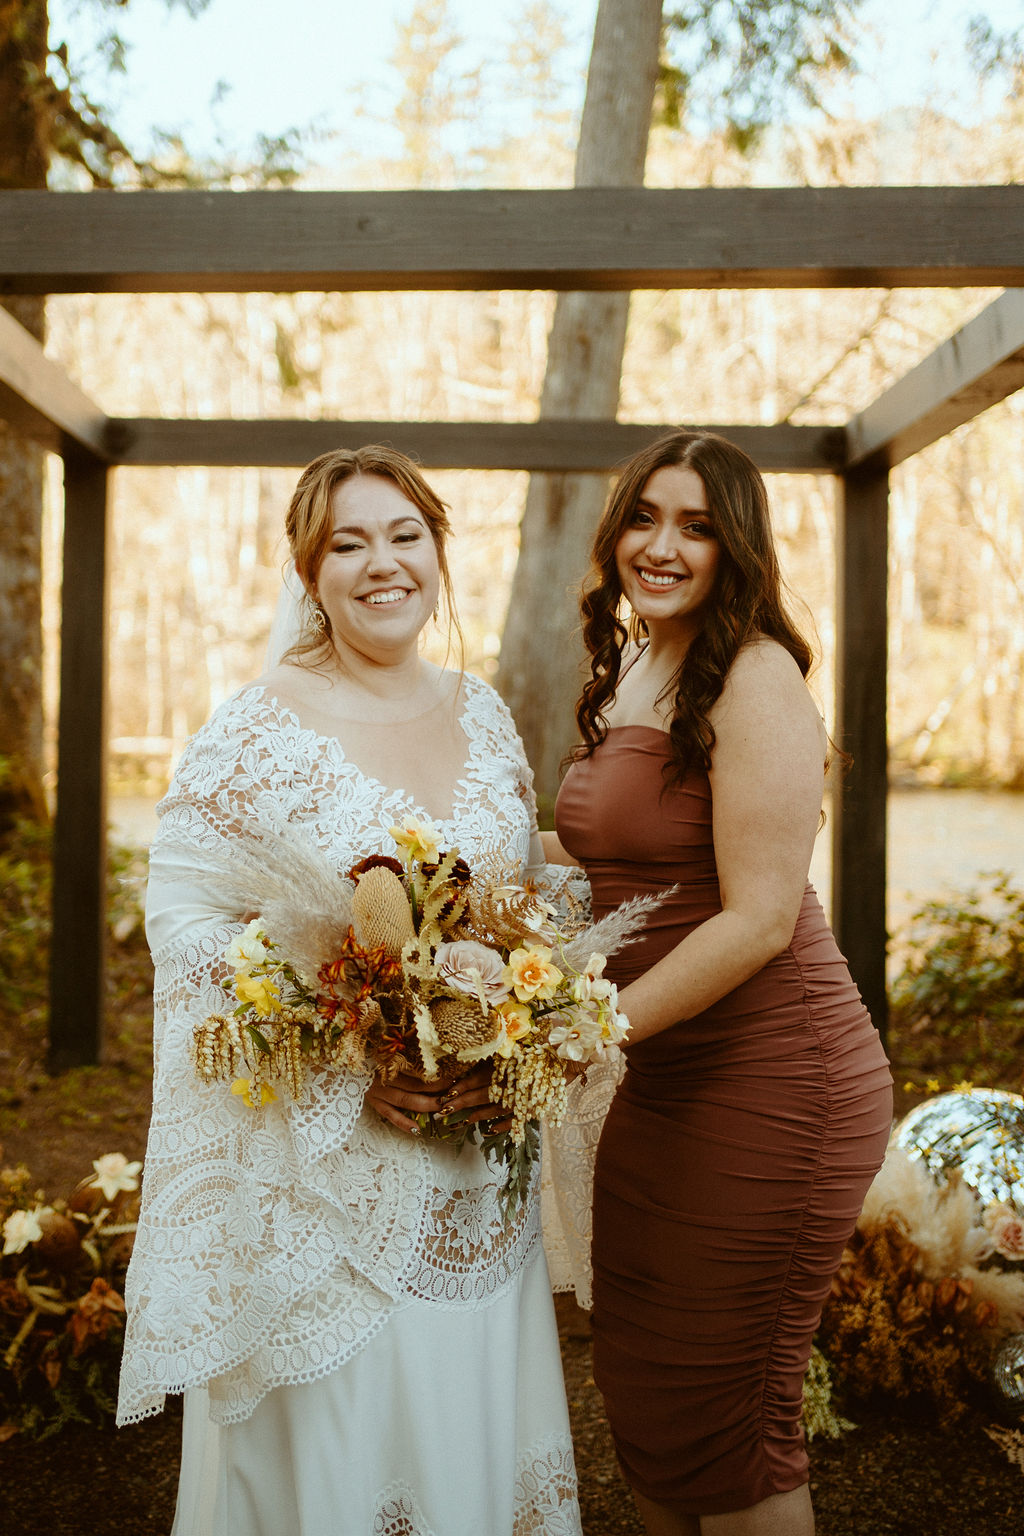 The bride poses with her maid of honor in front of the wooden arch 